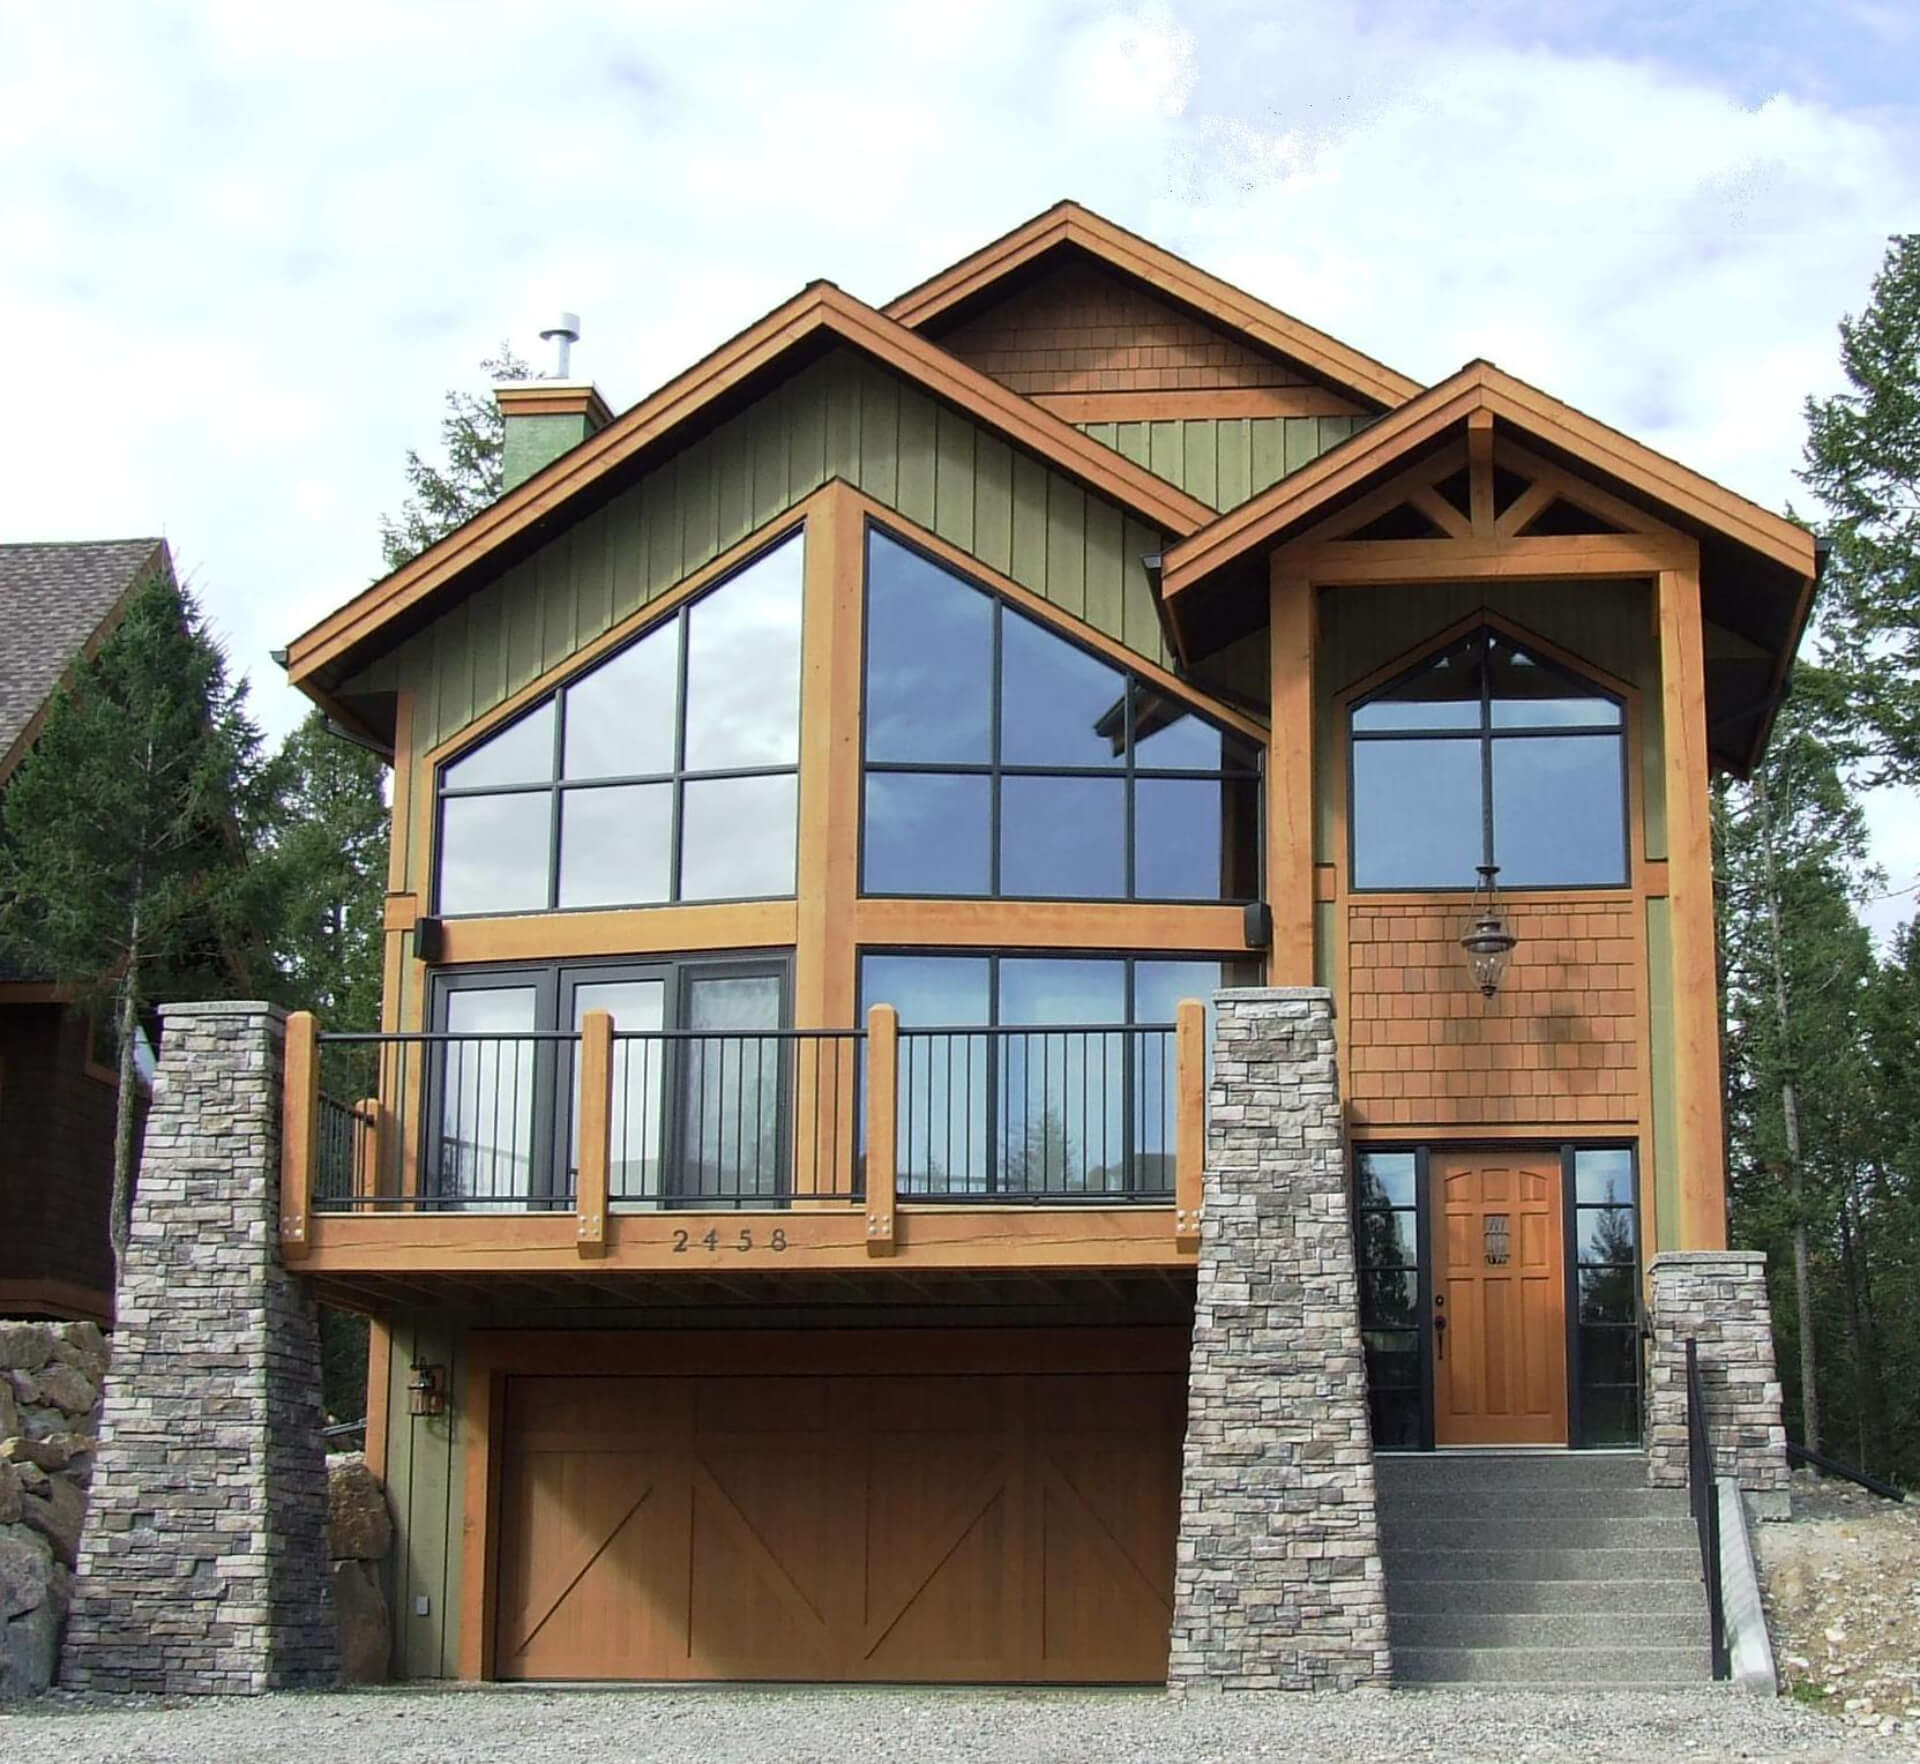 A tall alpine styled house with large window features and a single garage